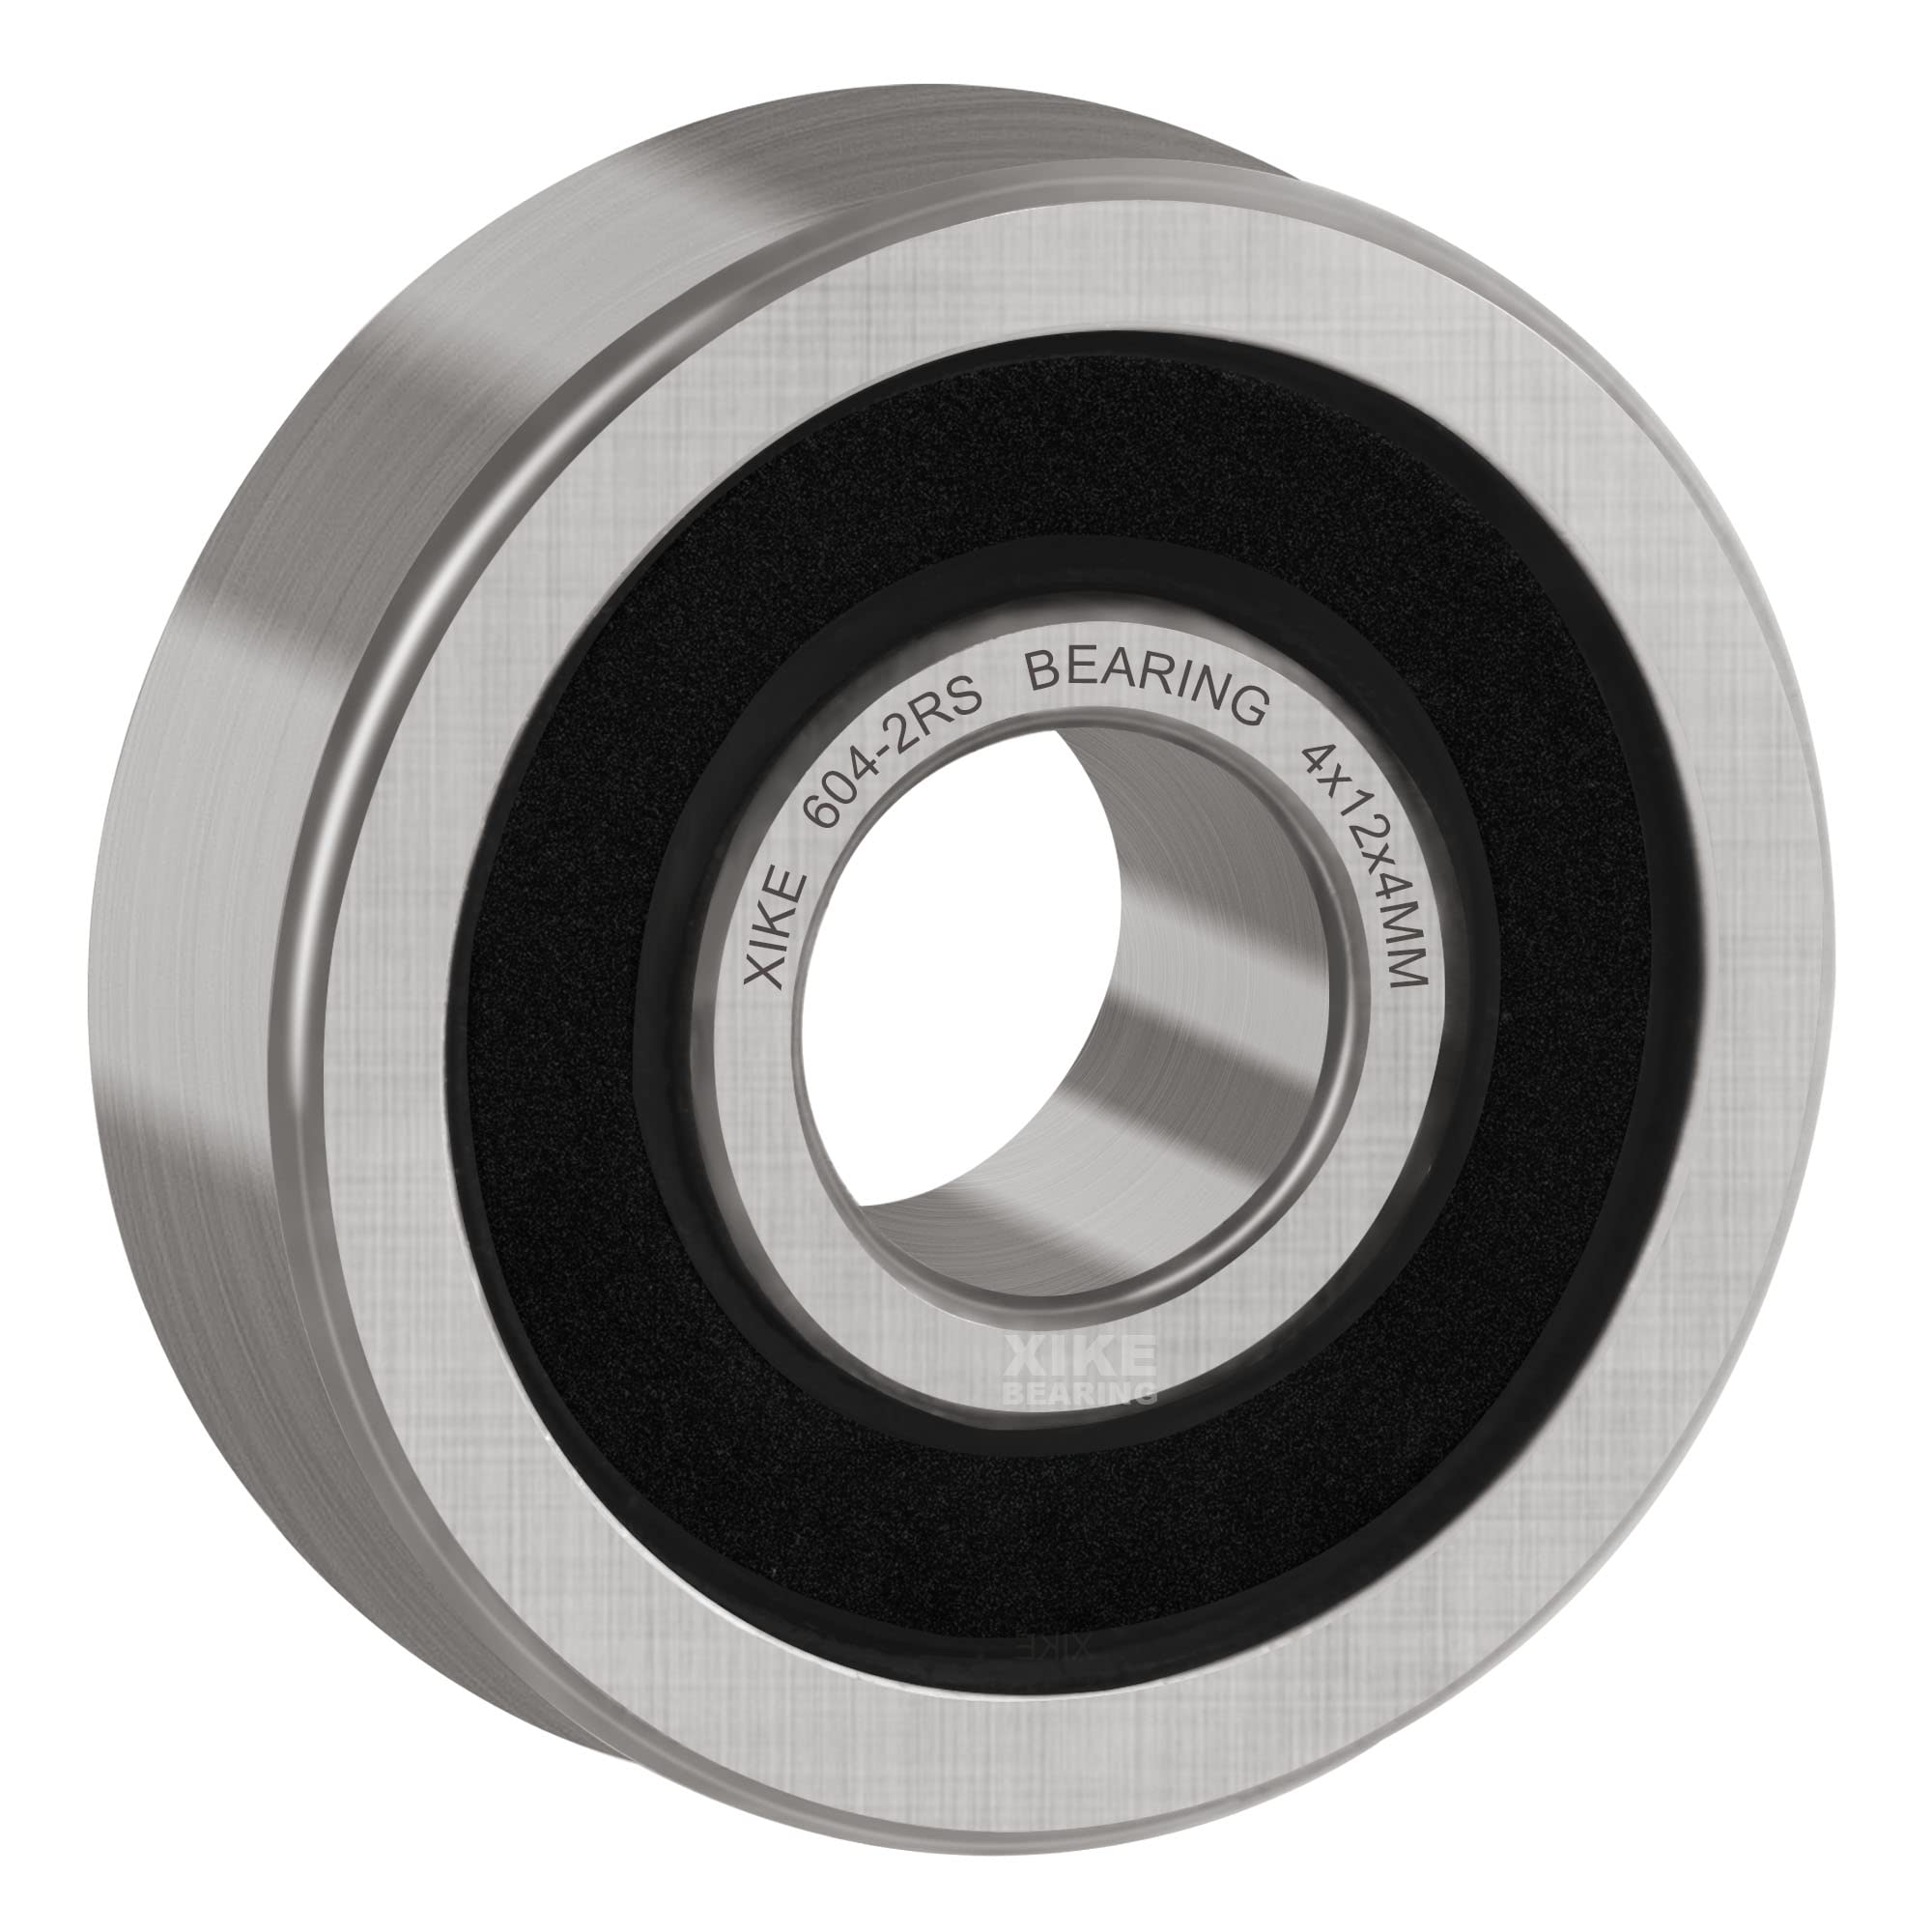 XIKE 604-2RS Miniature Ball Bearings 4x12x4mm Bearing Steel and Double Rubber Seals, Pre-Lubricated, 604RS Deep Groove Ball Bearing with Shields, 10 in a pack.